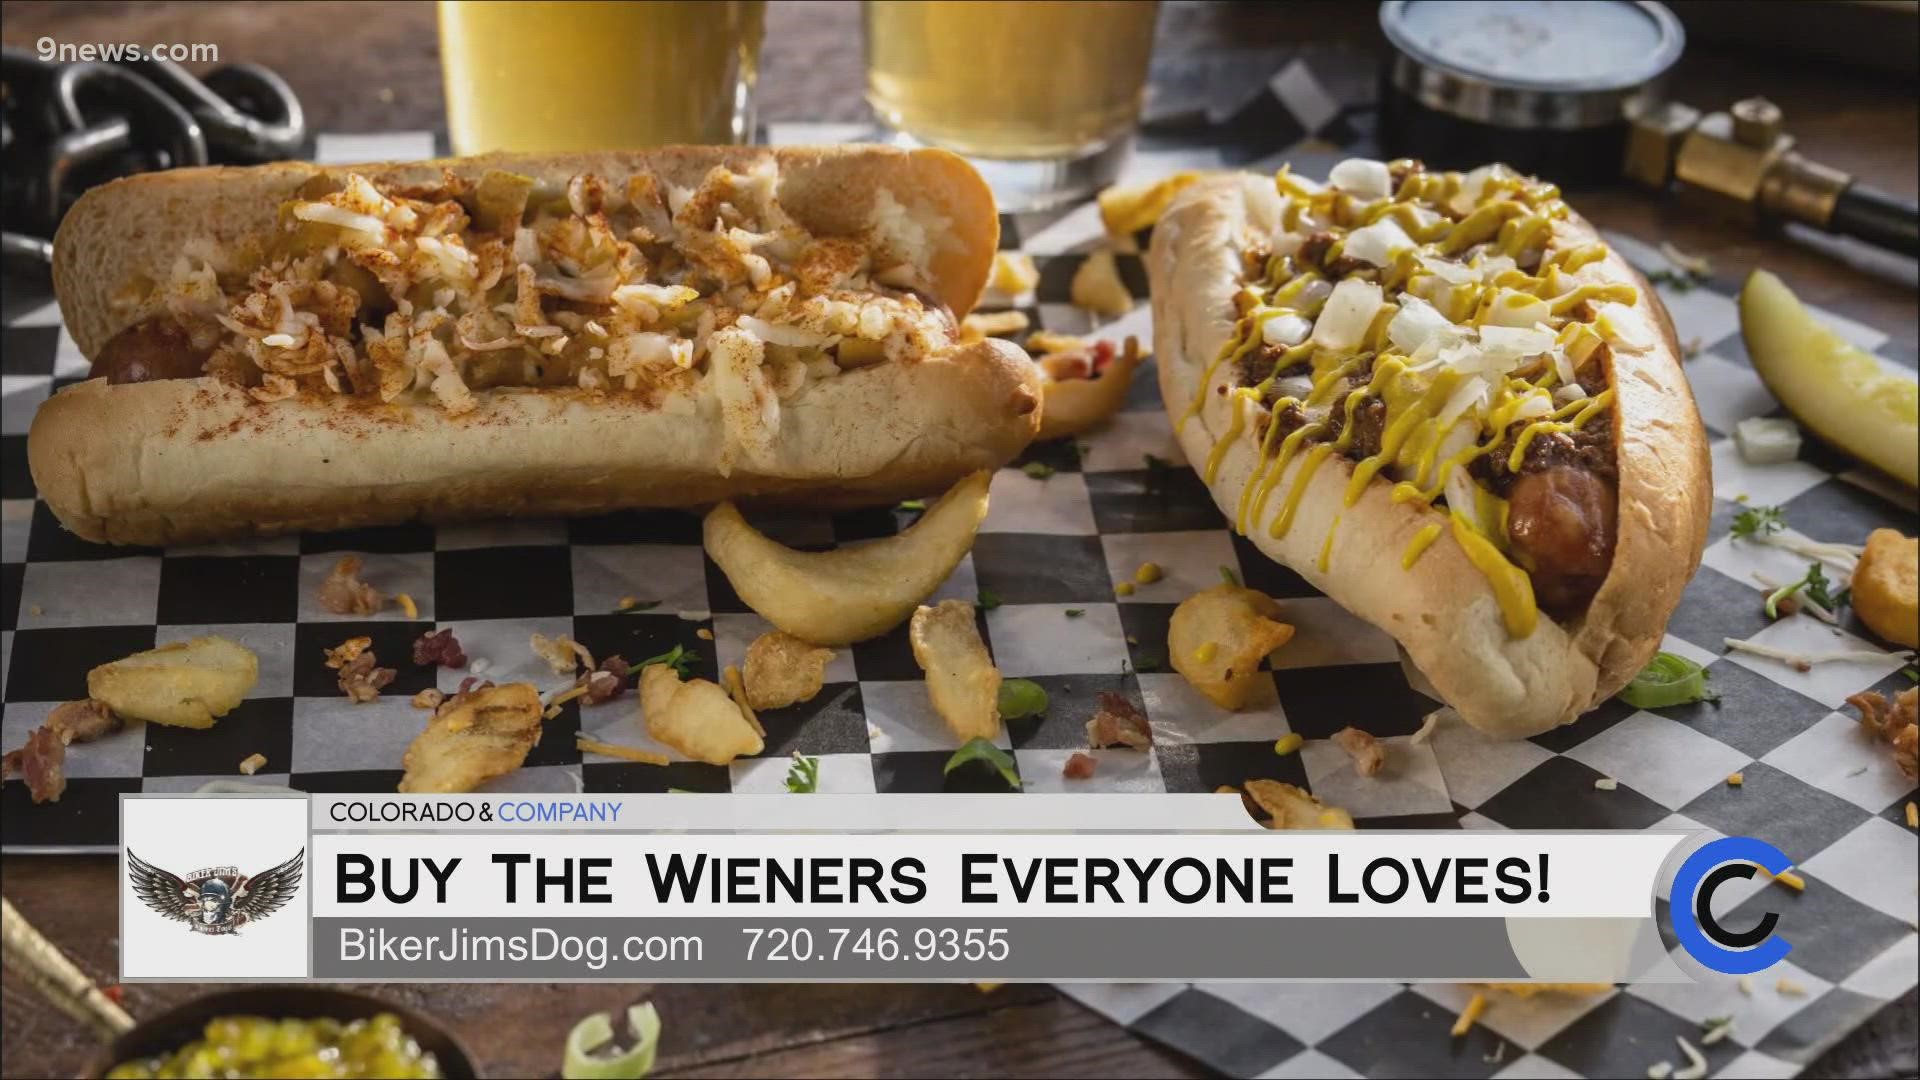 WE VISIT BIKER JIM'S KITCHEN FOR A MOUTH WATERING GOURMET DOG. STOP IN FOR A GOURMET DOG AND SOME FUN TAKES ON CLASSIC SIDES! LEARN MORE ONLINE AT BIKERJIMSDOGS.COM.